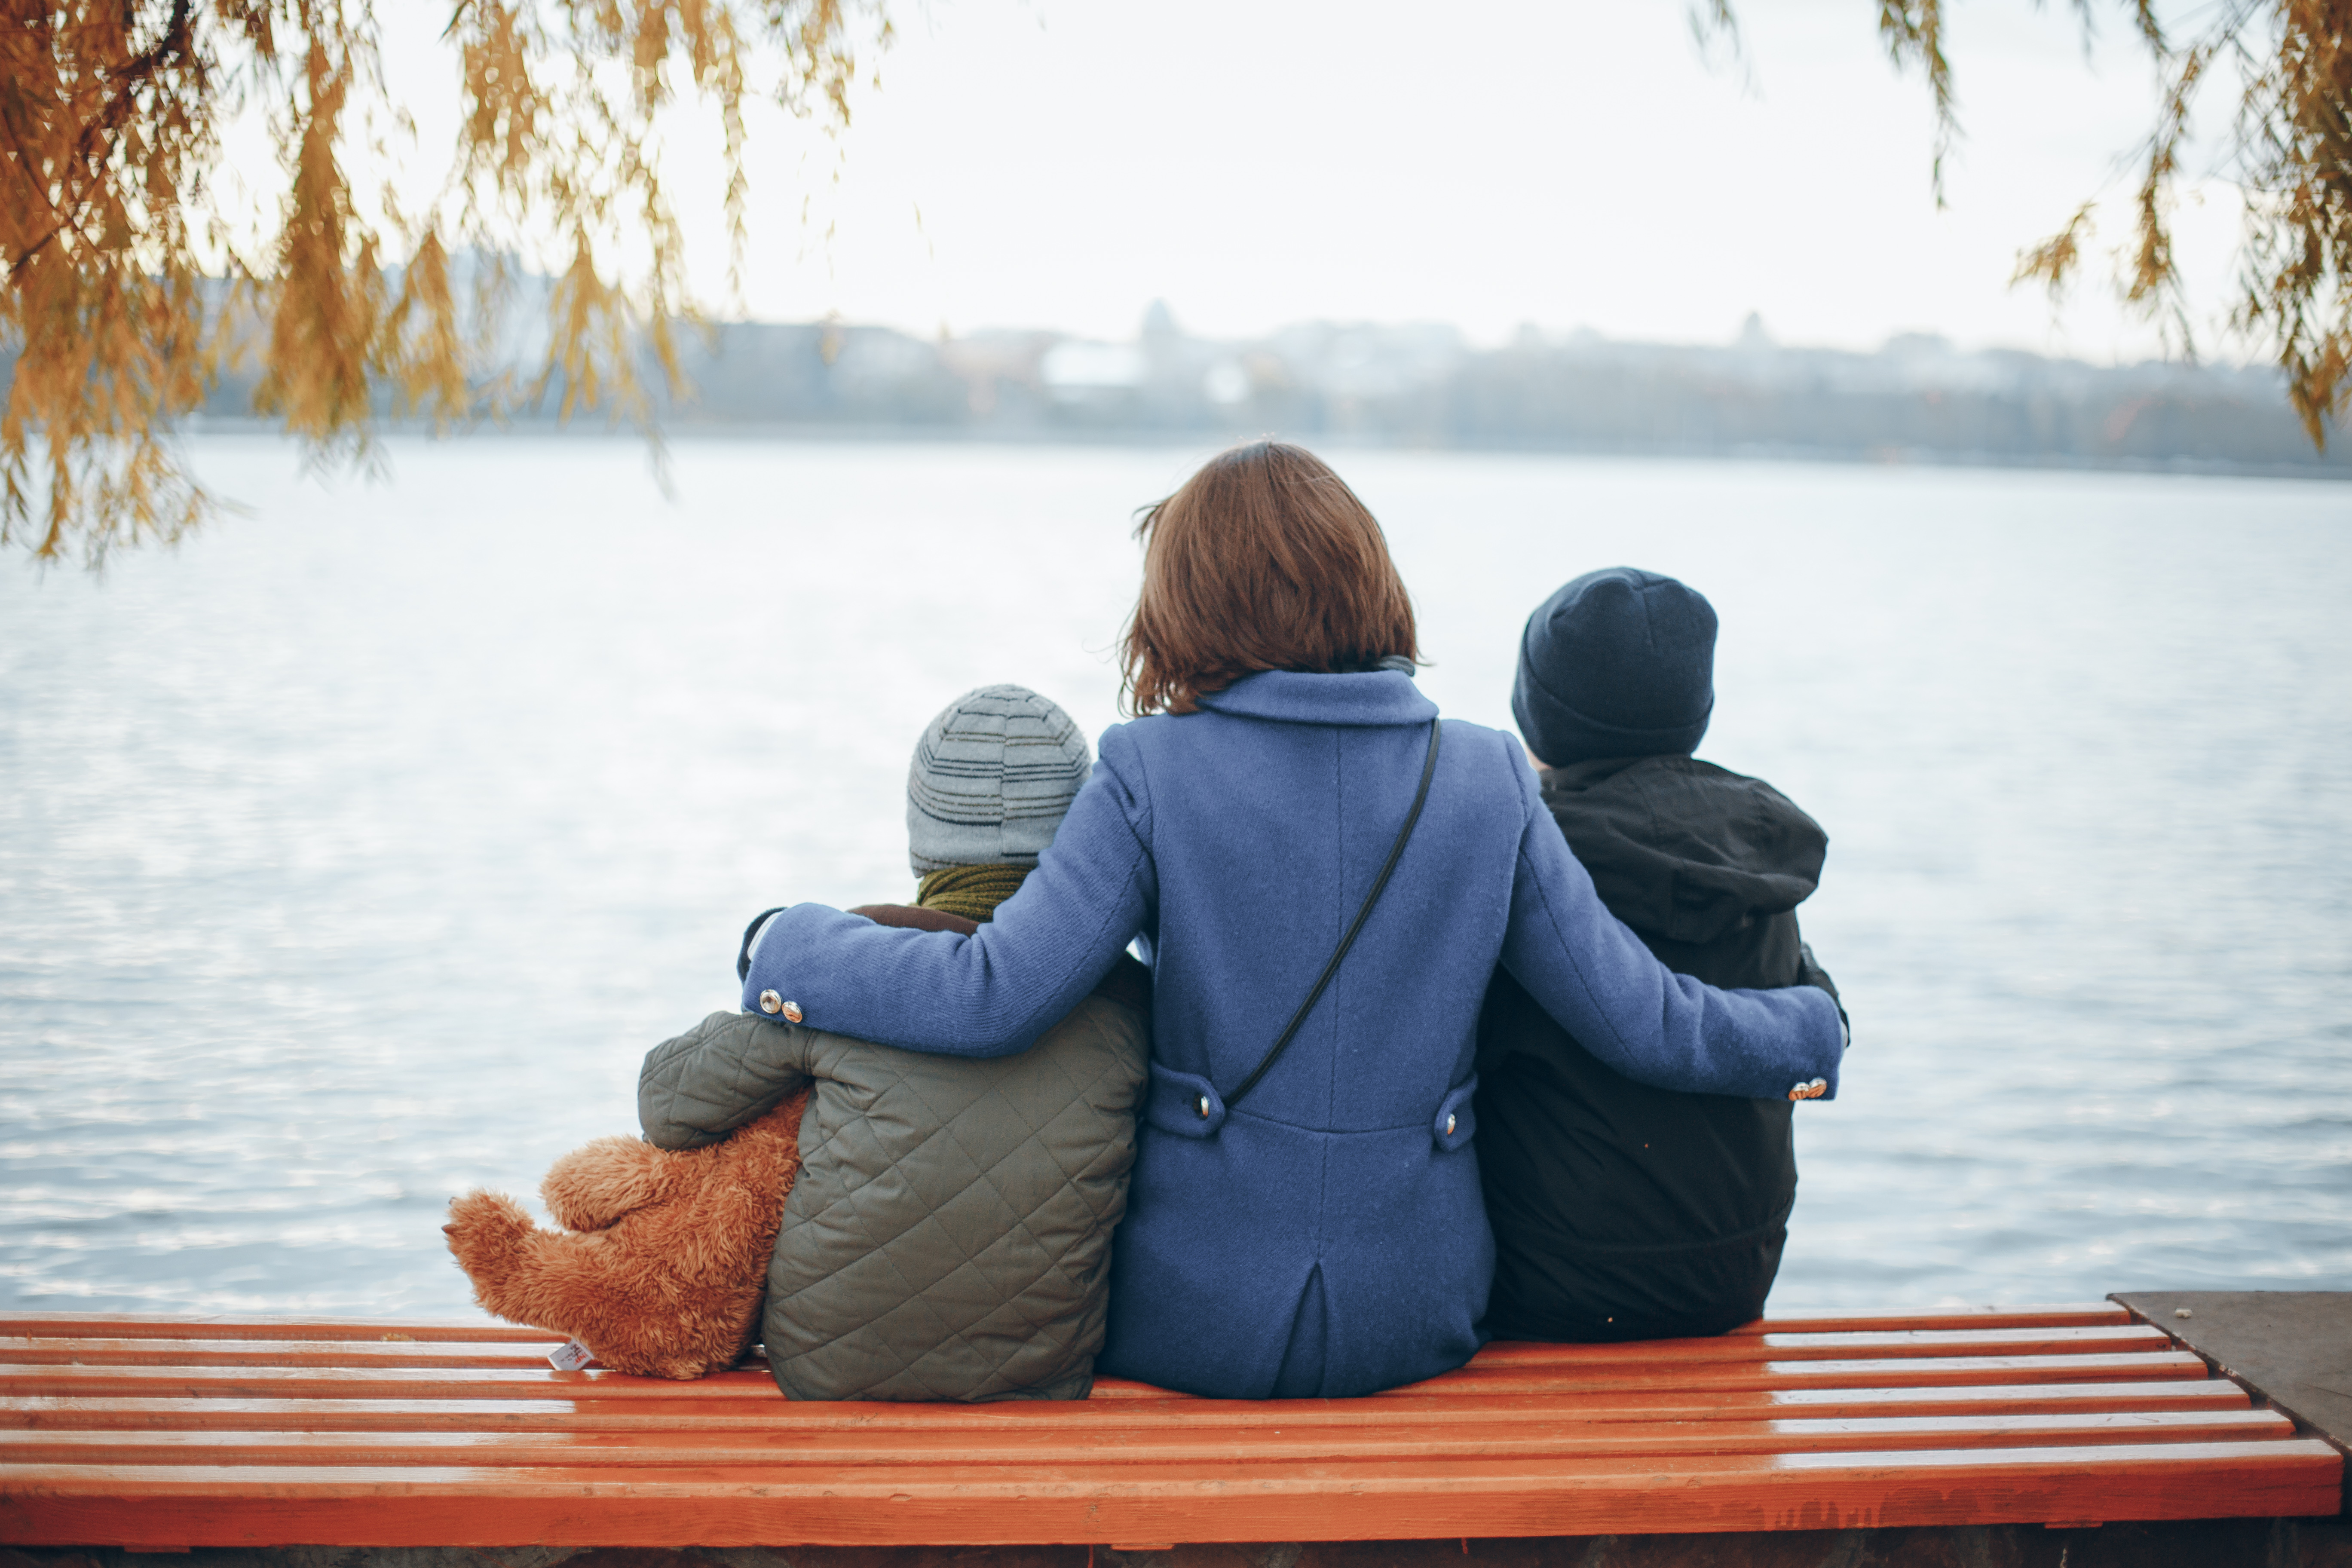 A woman sitting on a bench with two children | Source: Shutterstock